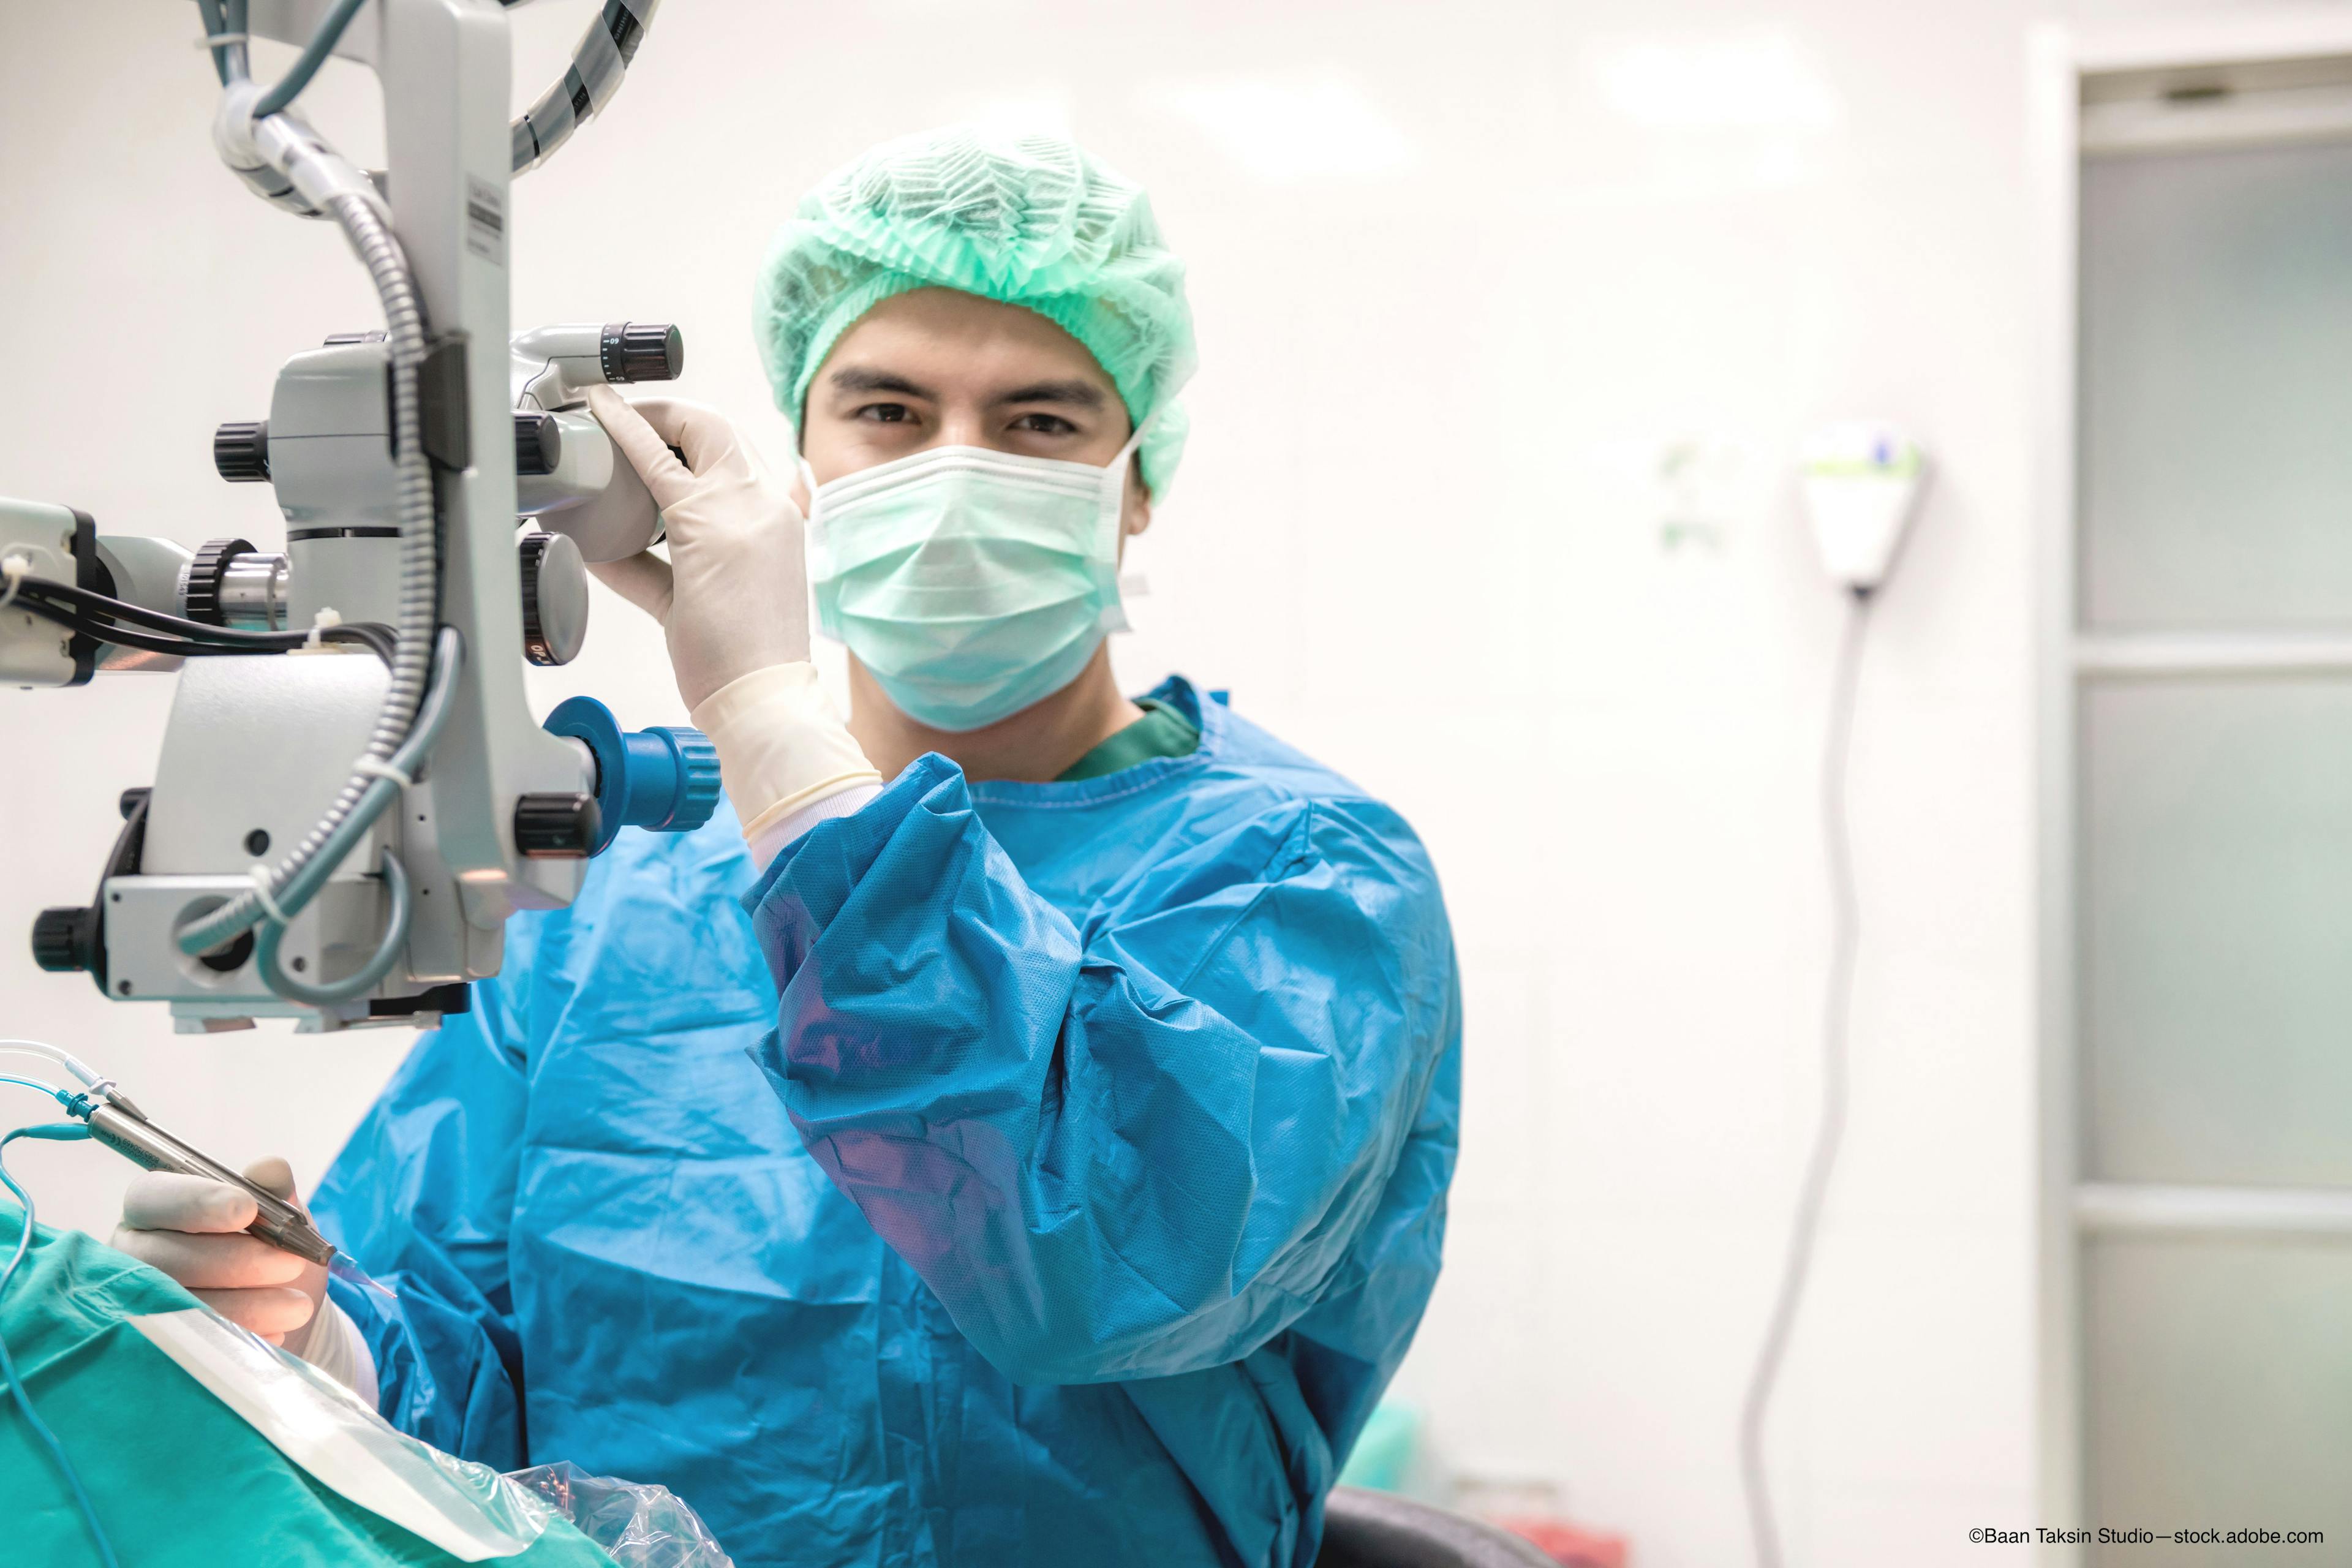 MIGS and cataract surgery option offers positive results